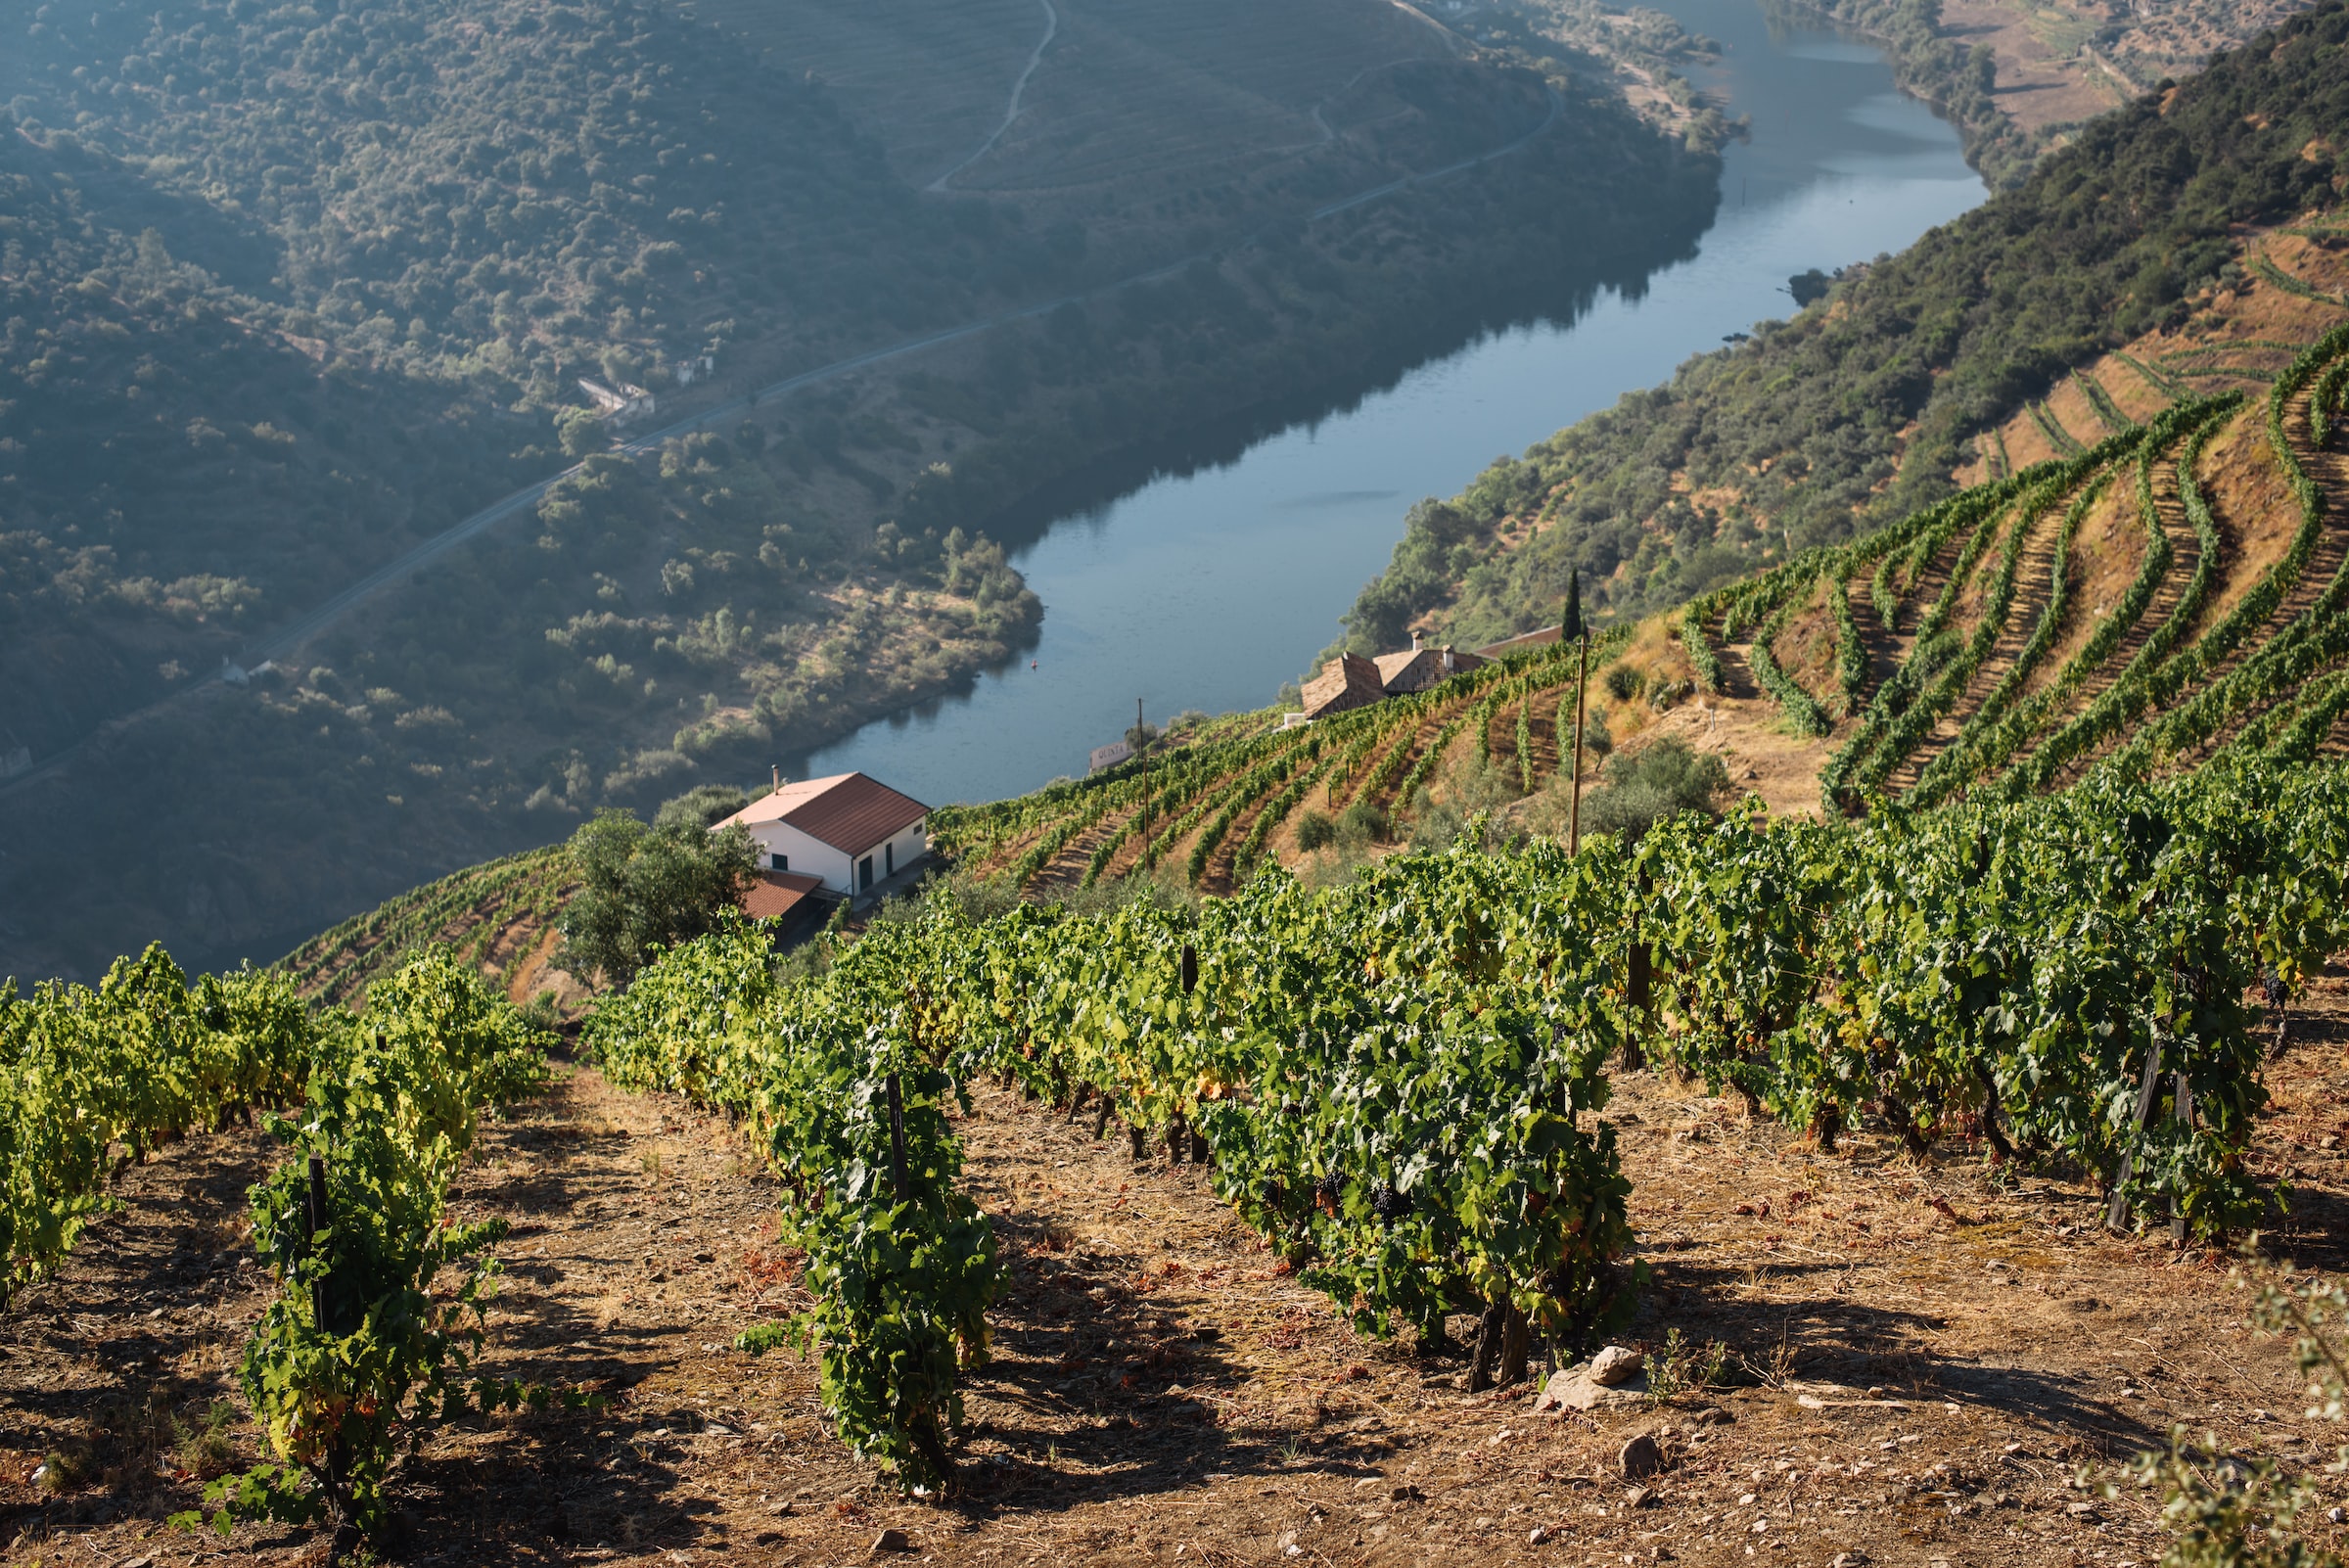 Rows of grapevines in a vineyard in the Douro Valley in Portugal